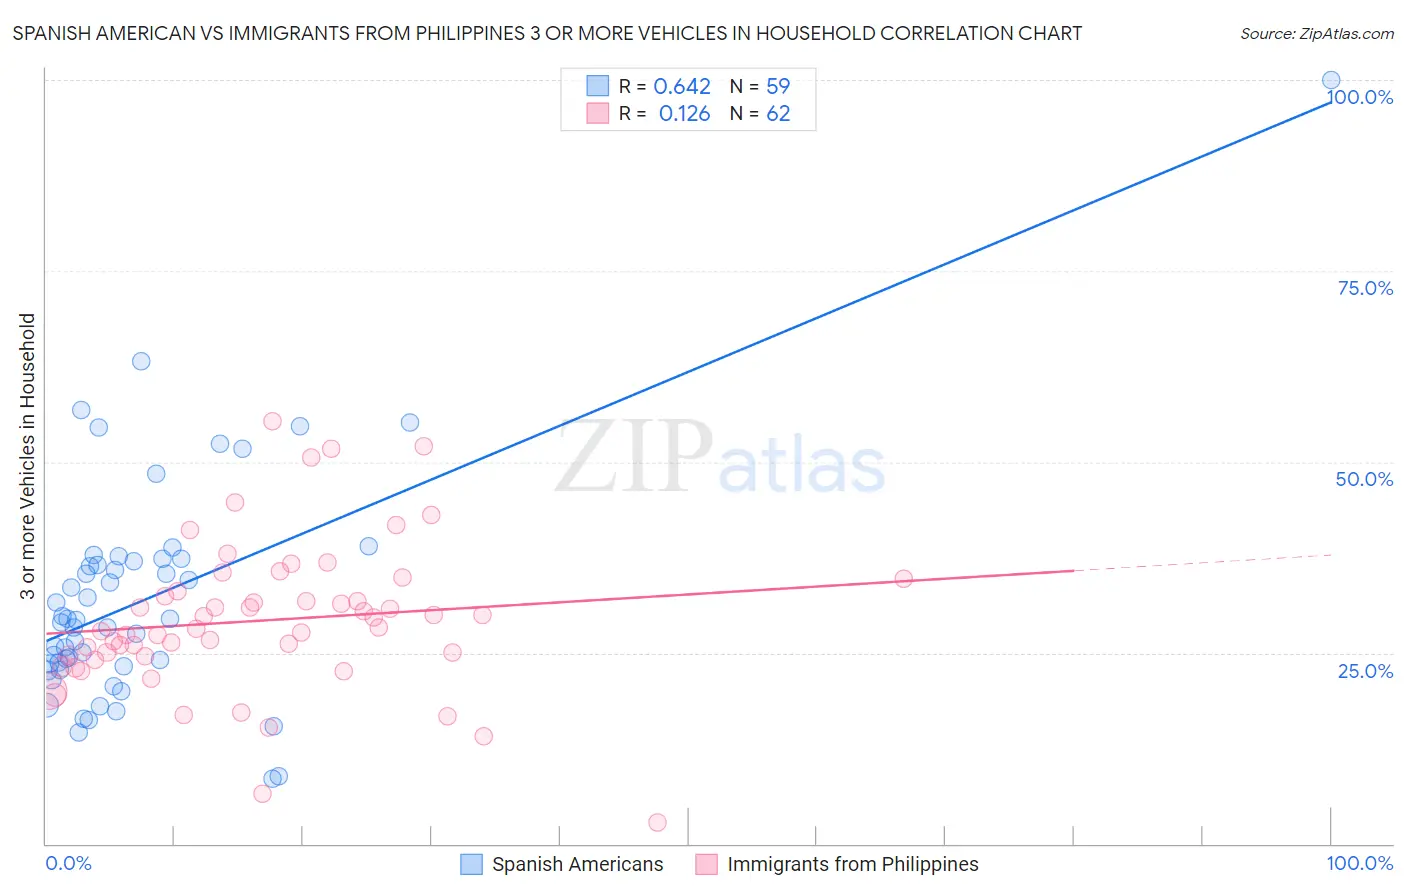 Spanish American vs Immigrants from Philippines 3 or more Vehicles in Household